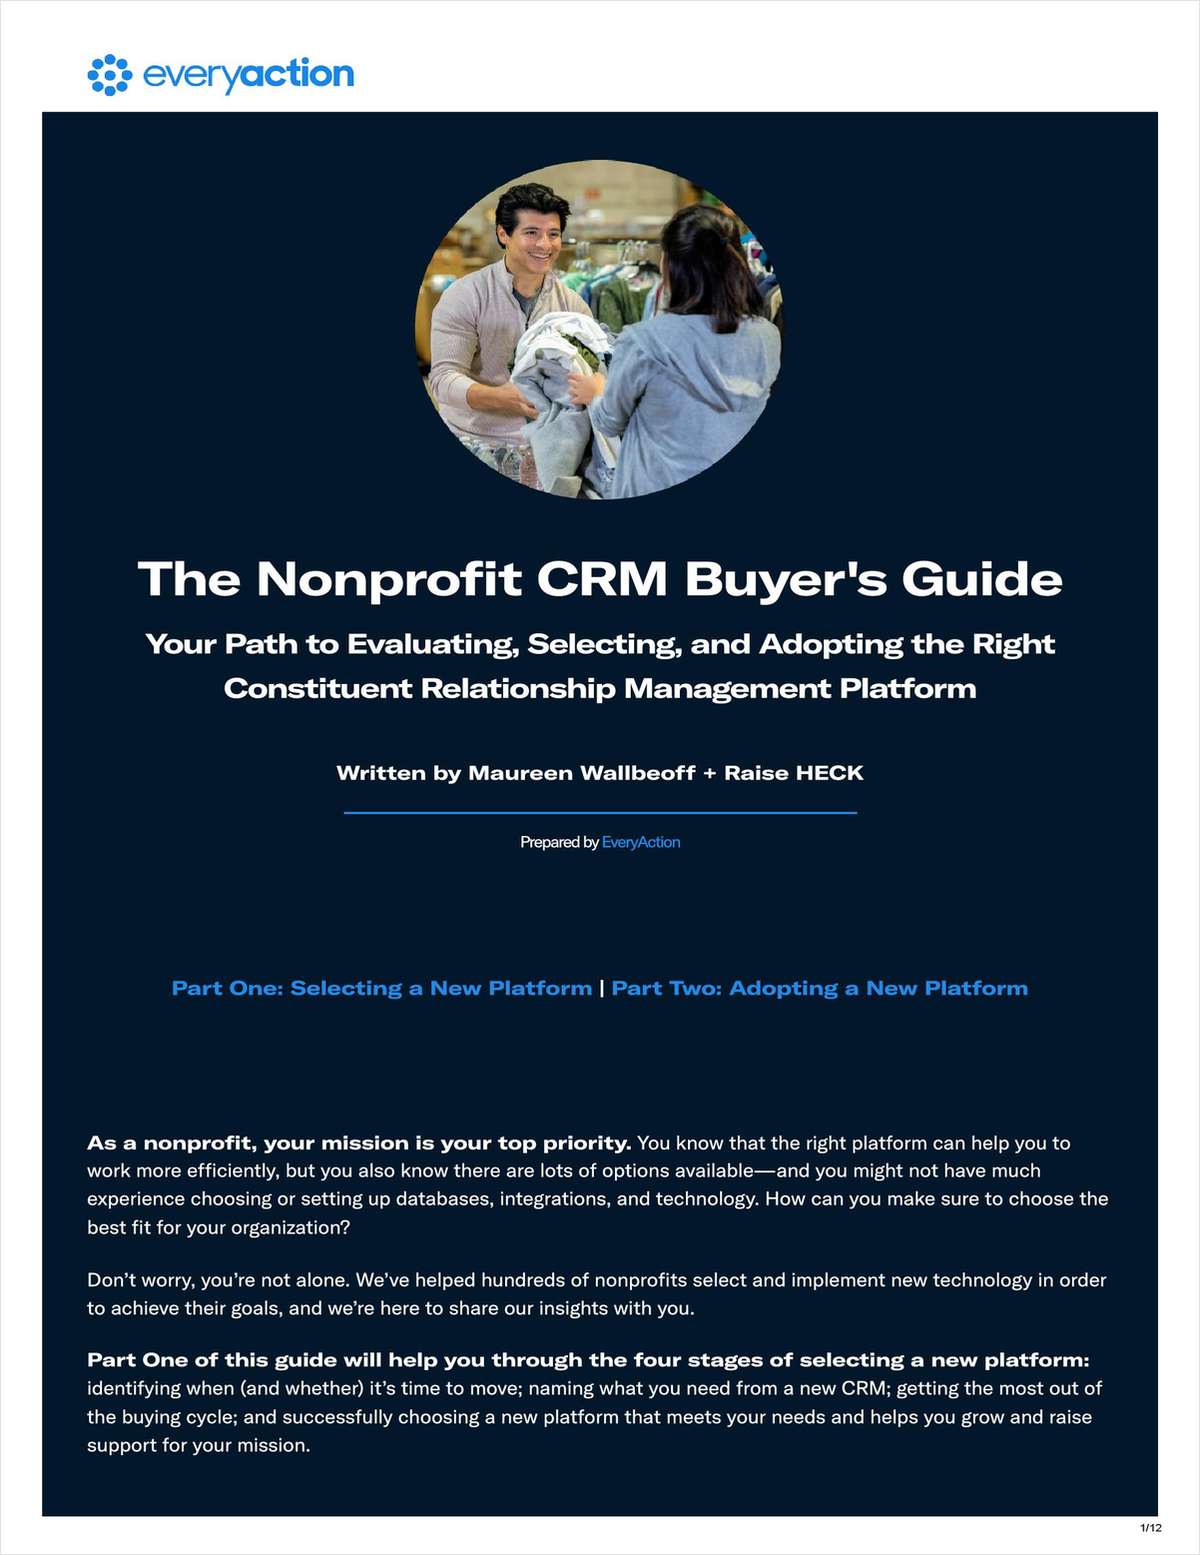 The Nonprofit CRM Buyer's Guide